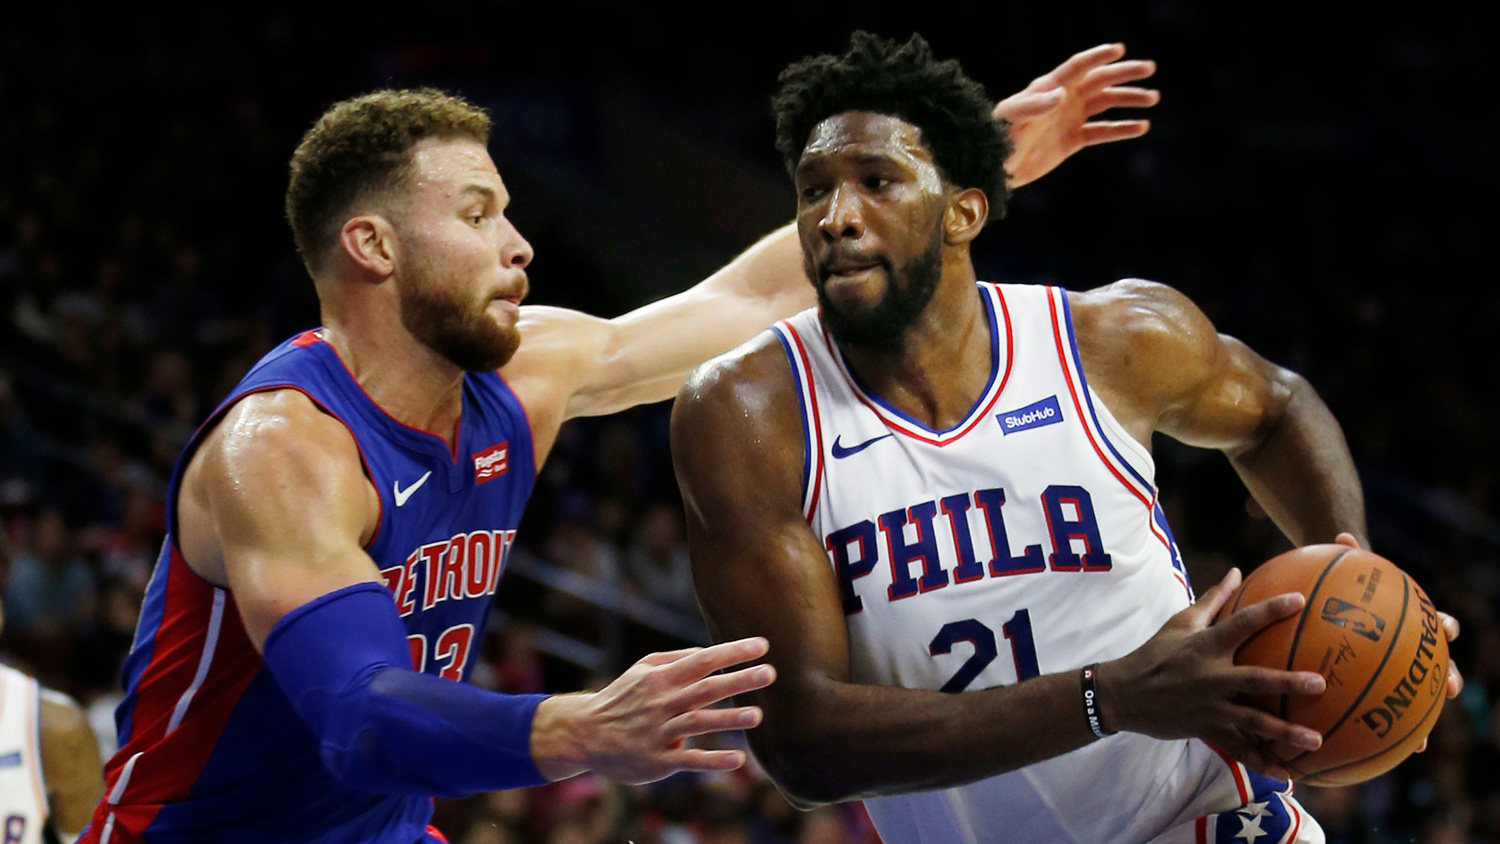 Happy Birthday Joel Embiid and Blake Griffin!

Who will end up with the better career? 